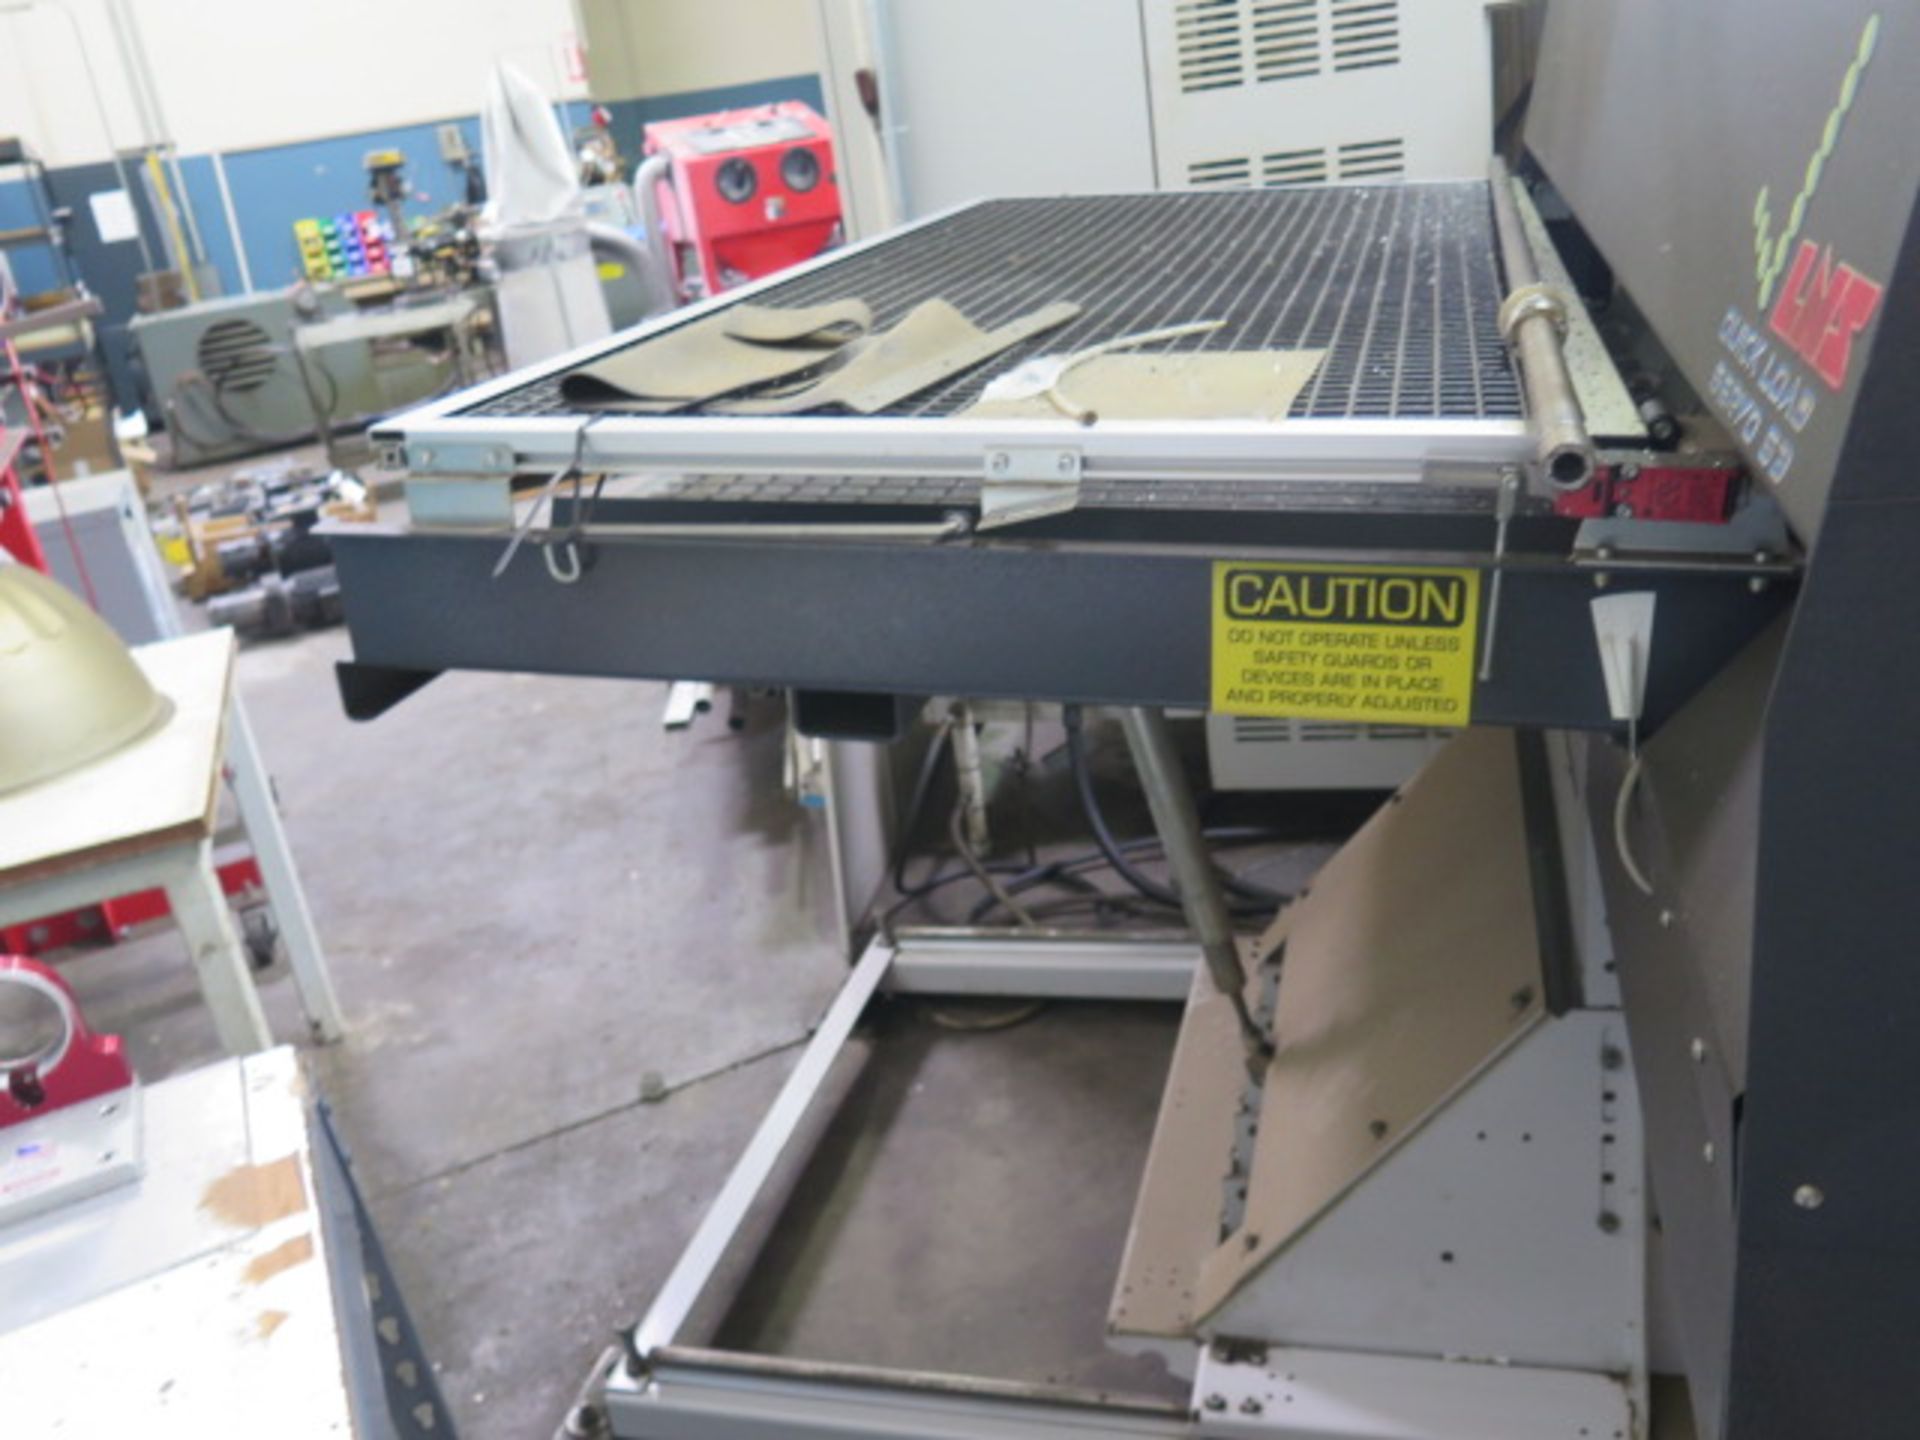 LNS Quick Load Servo S3 Automatic Bar Loader/Feeder (SOLD AS-IS - NO WARRANTY) - Image 6 of 9